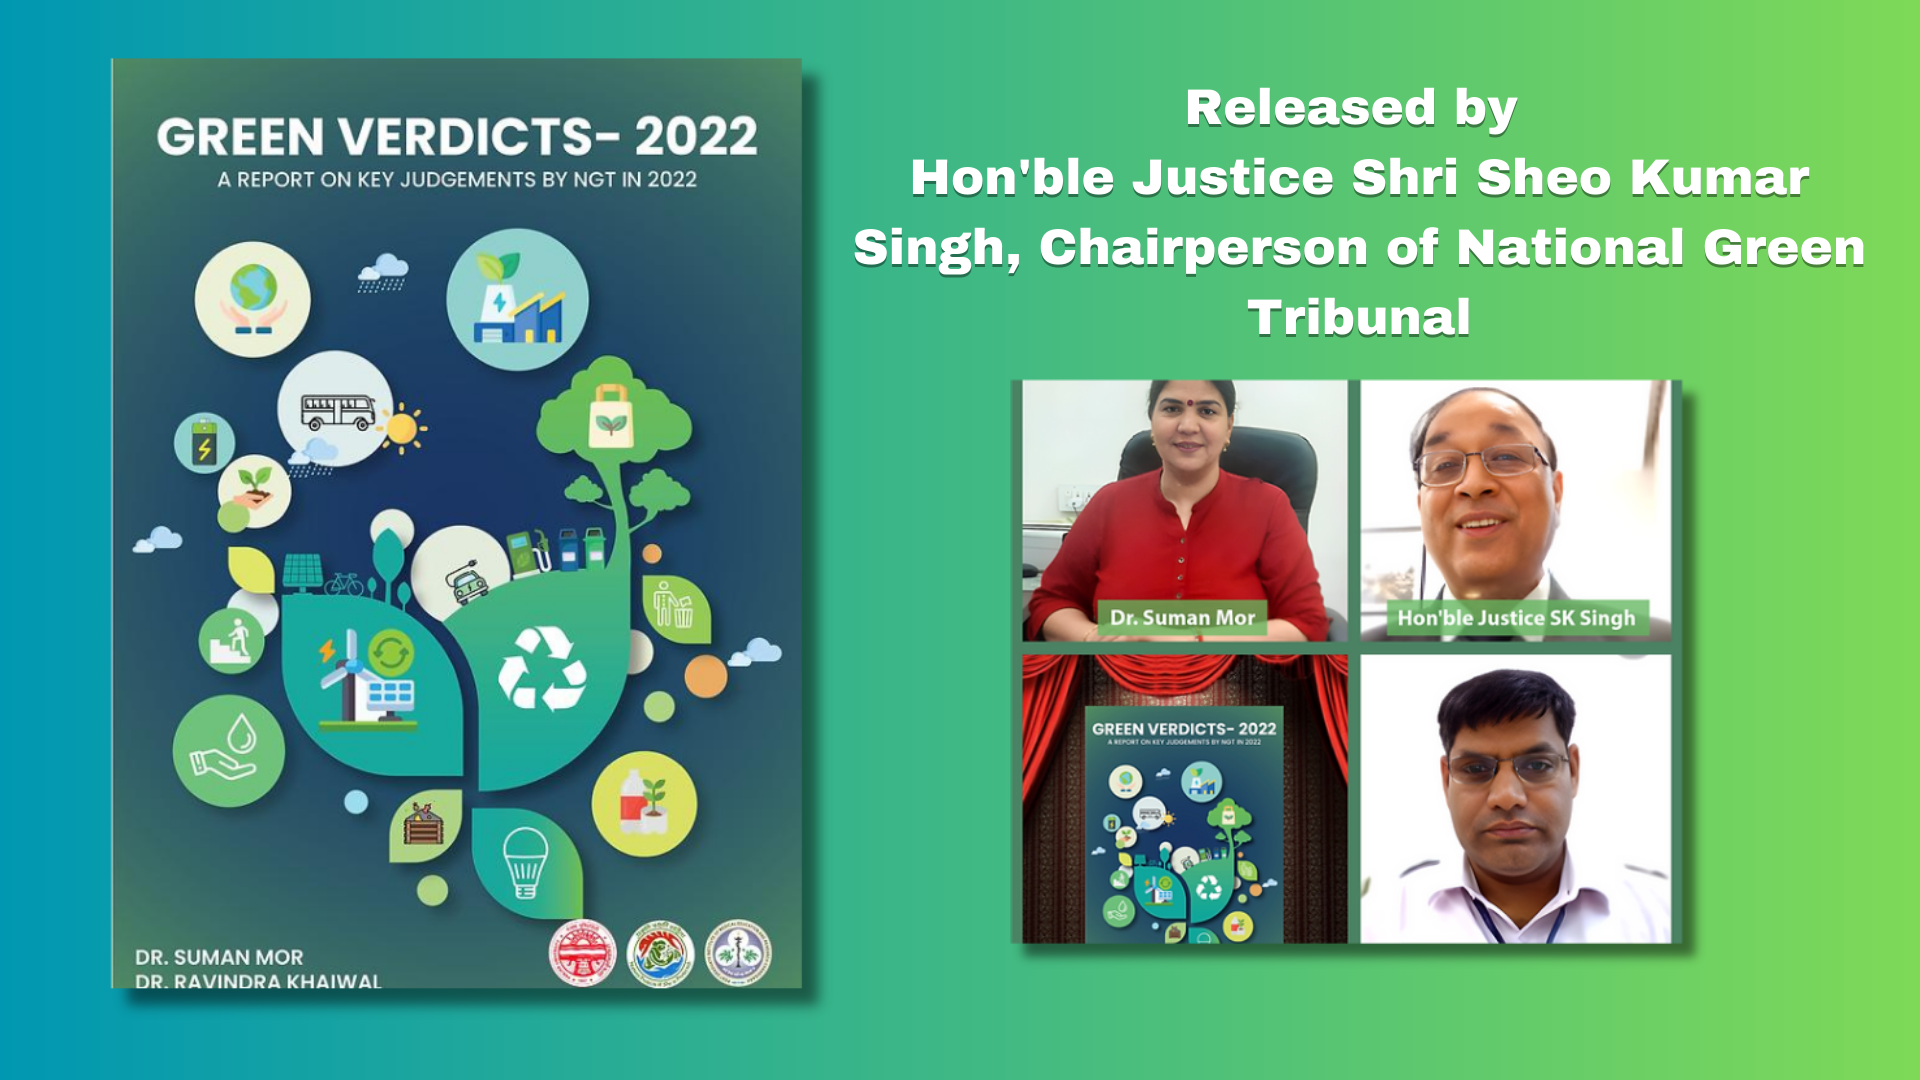 Released by Hon'ble Justice Shri Sheo Kumar Singh, Chairperson of National Green Tribunal